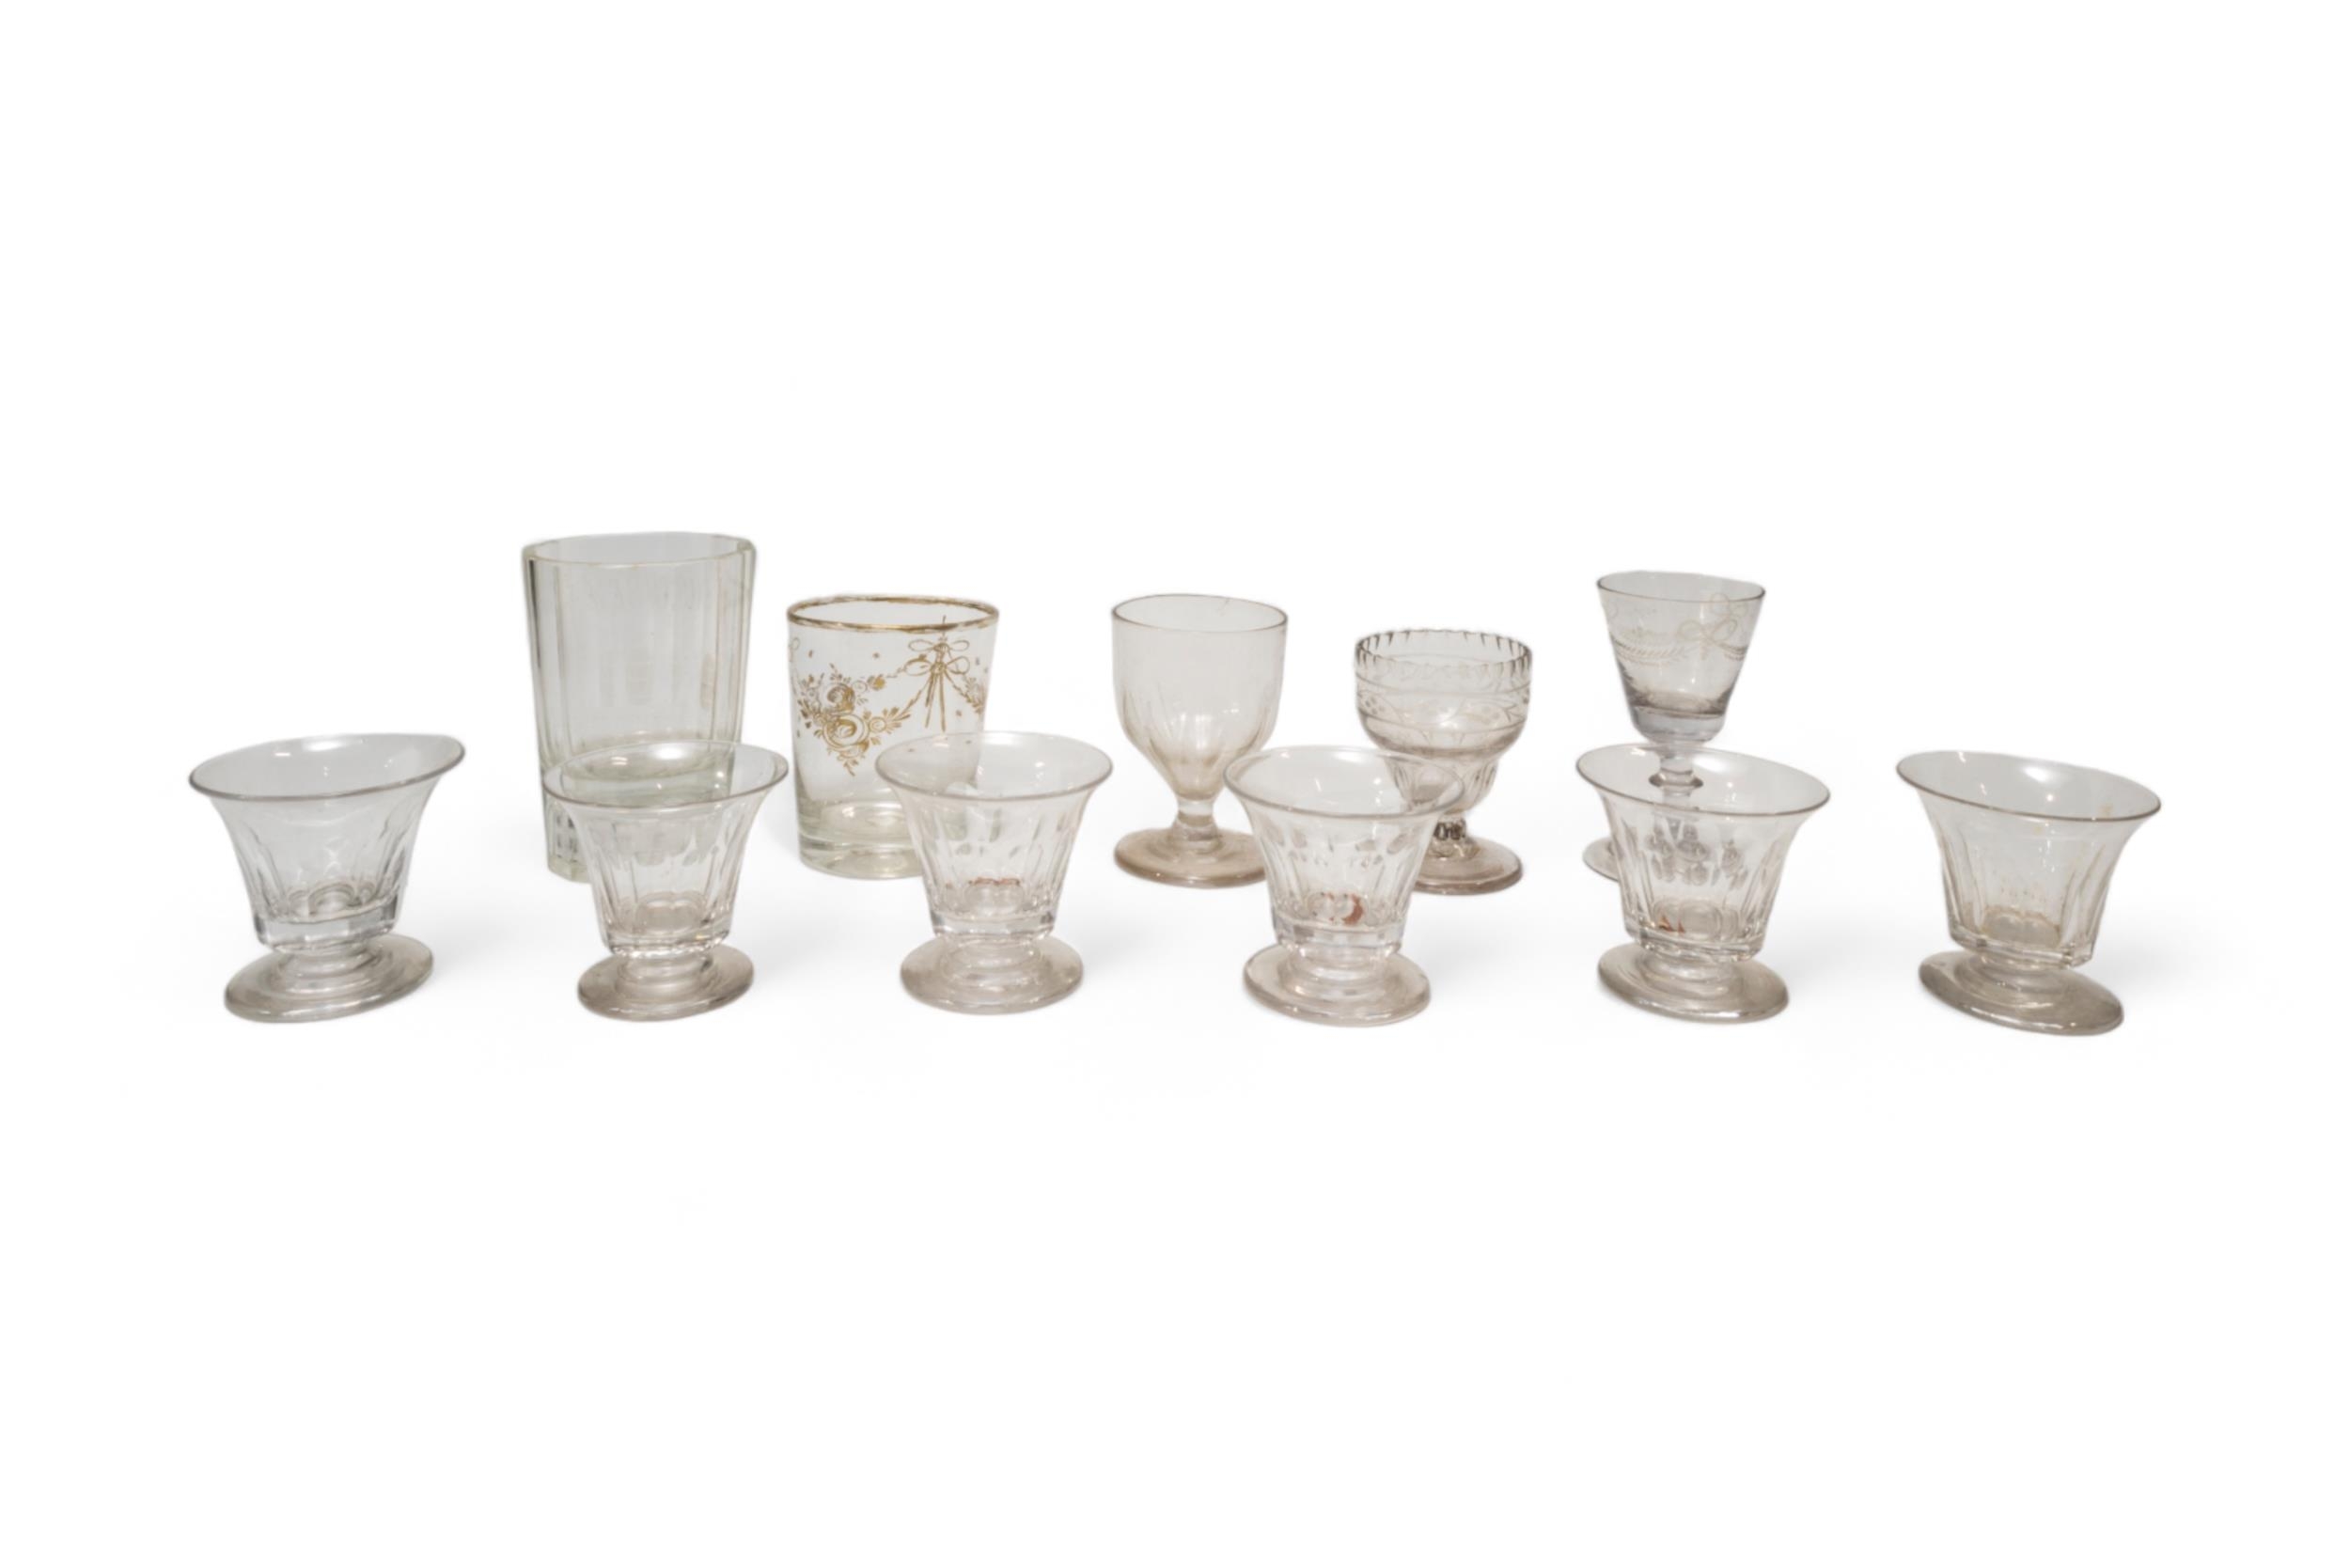 A LARGE MIXED GROUP OF STEMMED GLASSES AND TUMBLERS, PREDOMINANTLY 18TH/19TH CENTURY, the group - Image 7 of 7